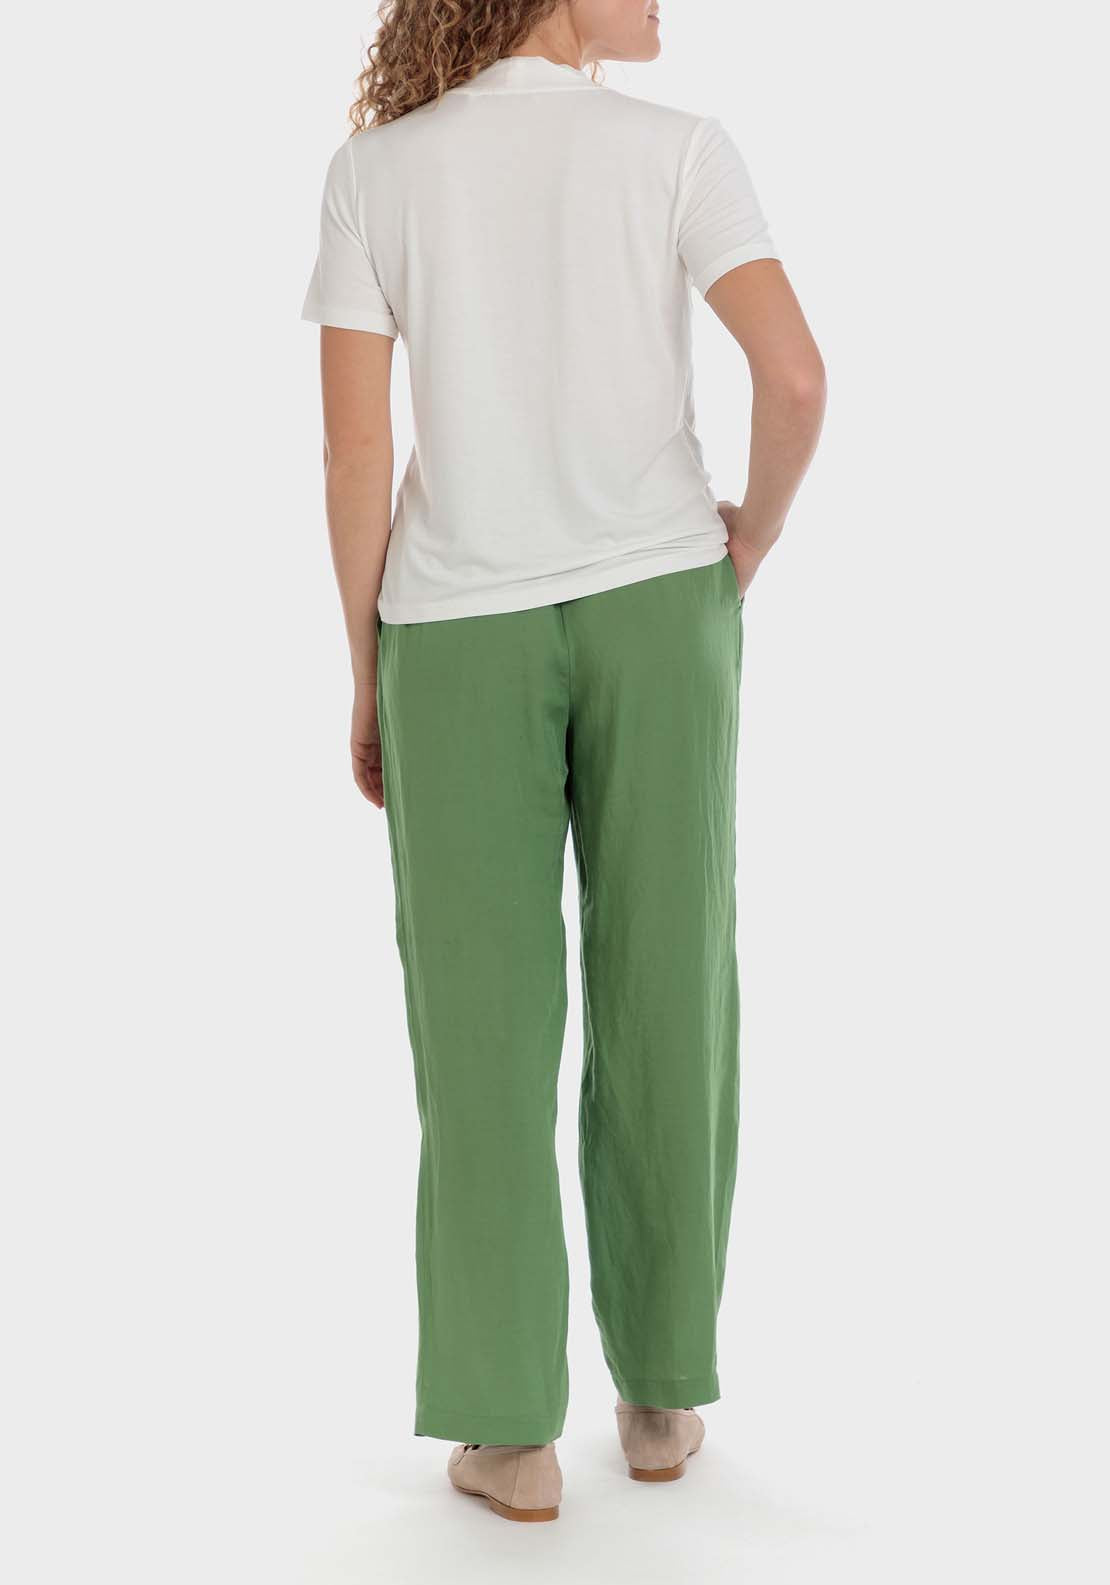 Punt Roma Linen Trousers - Green 5 Shaws Department Stores